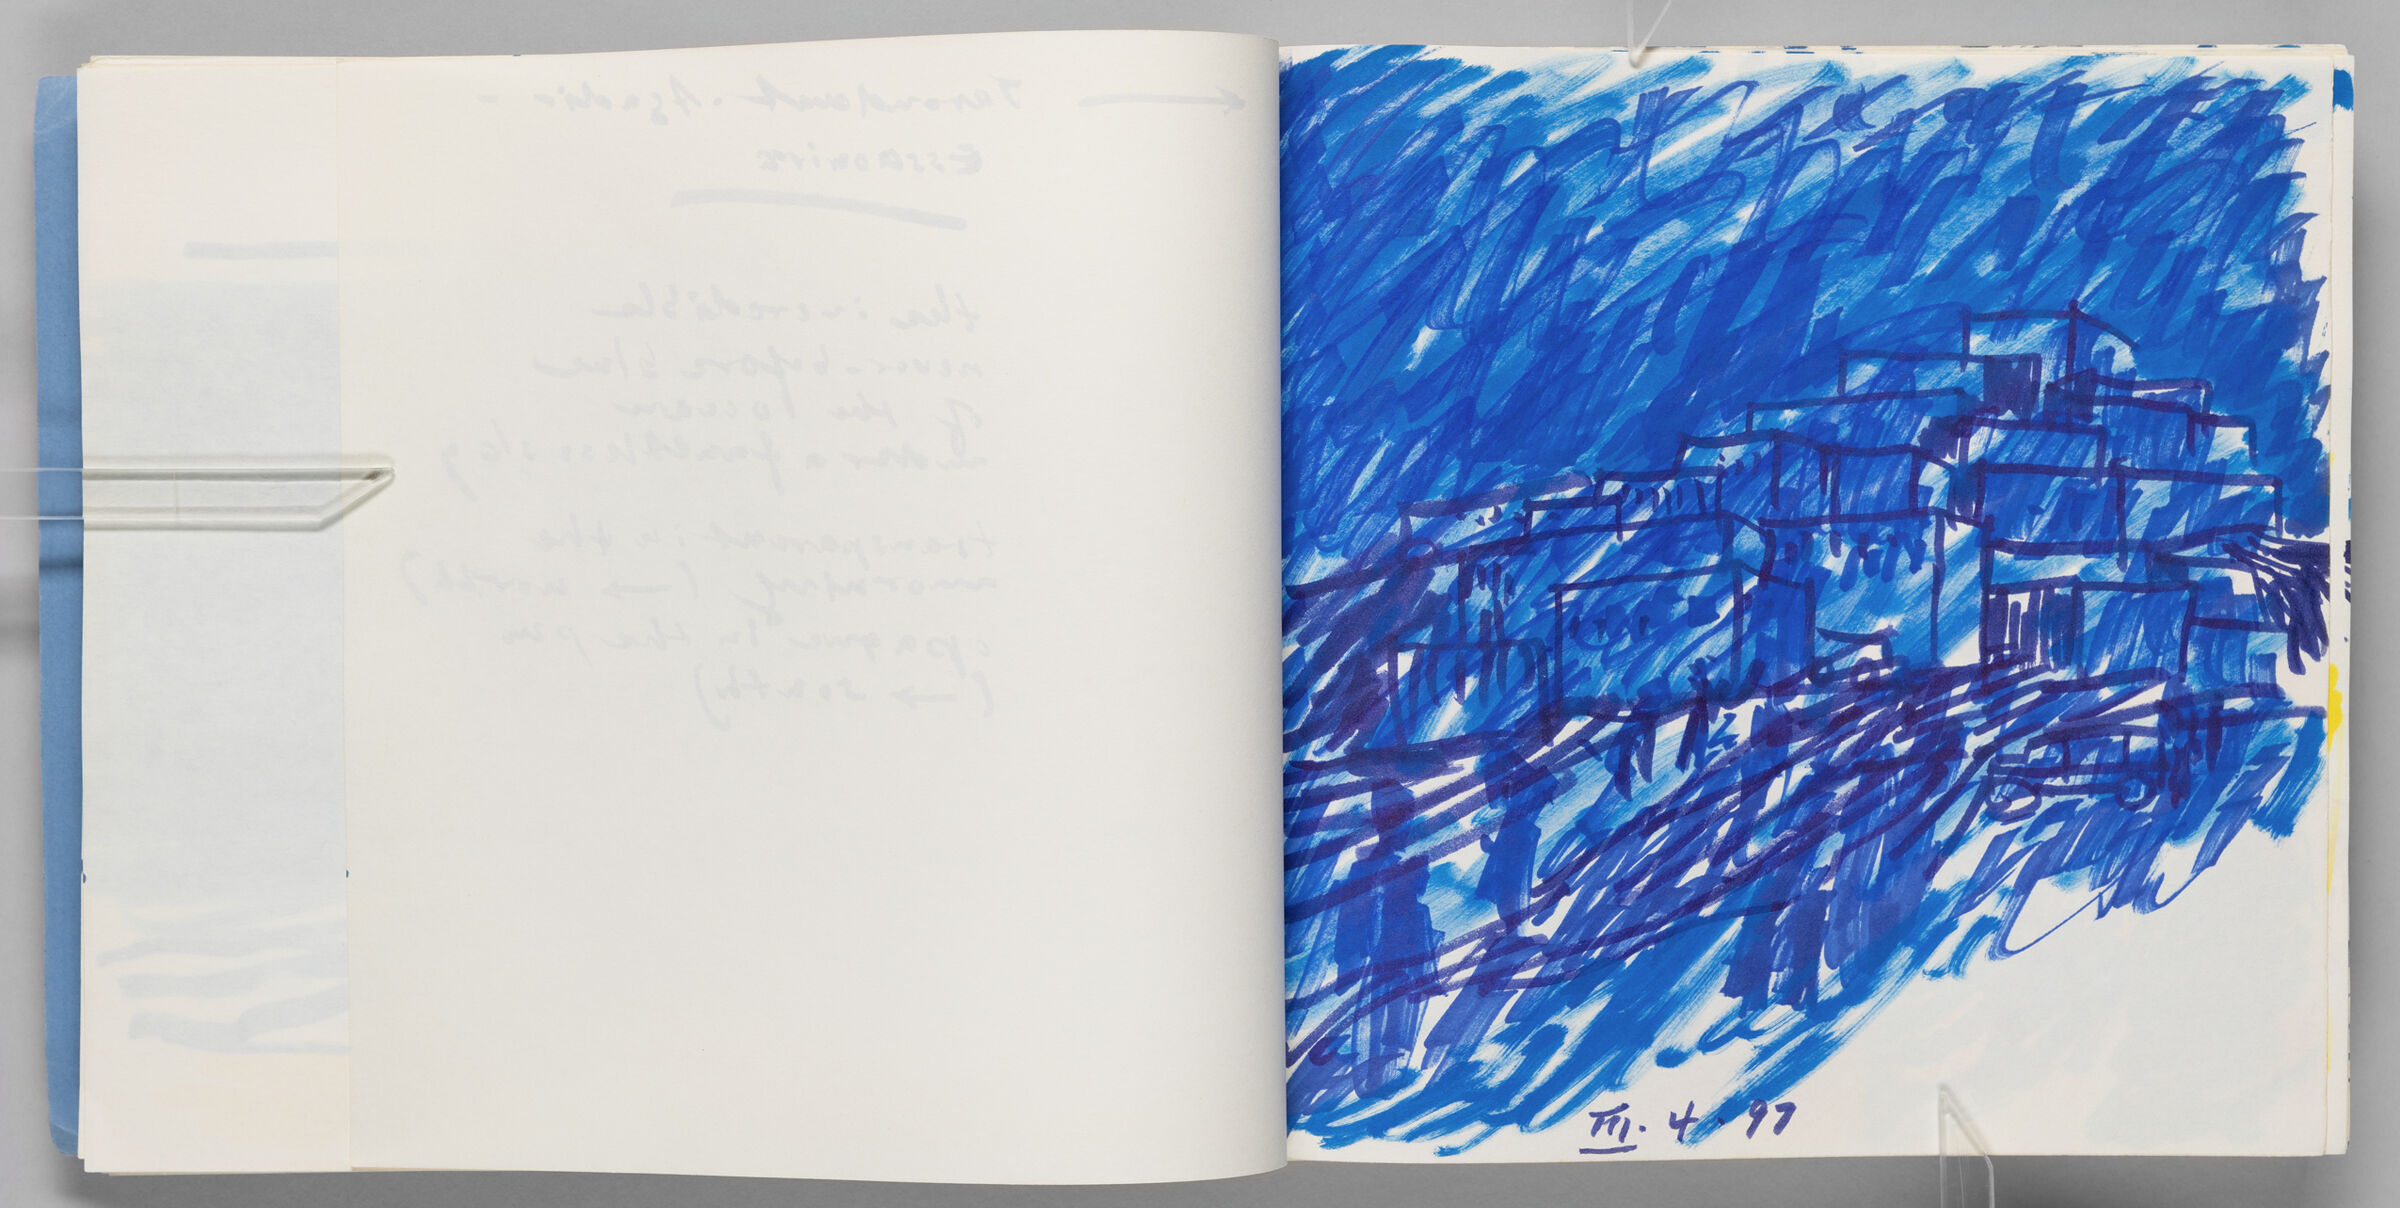 Untitled (Bleed-Through Of Previous Page, Left Page); Untitled (Moroccan Village In Blue, Right Page)
